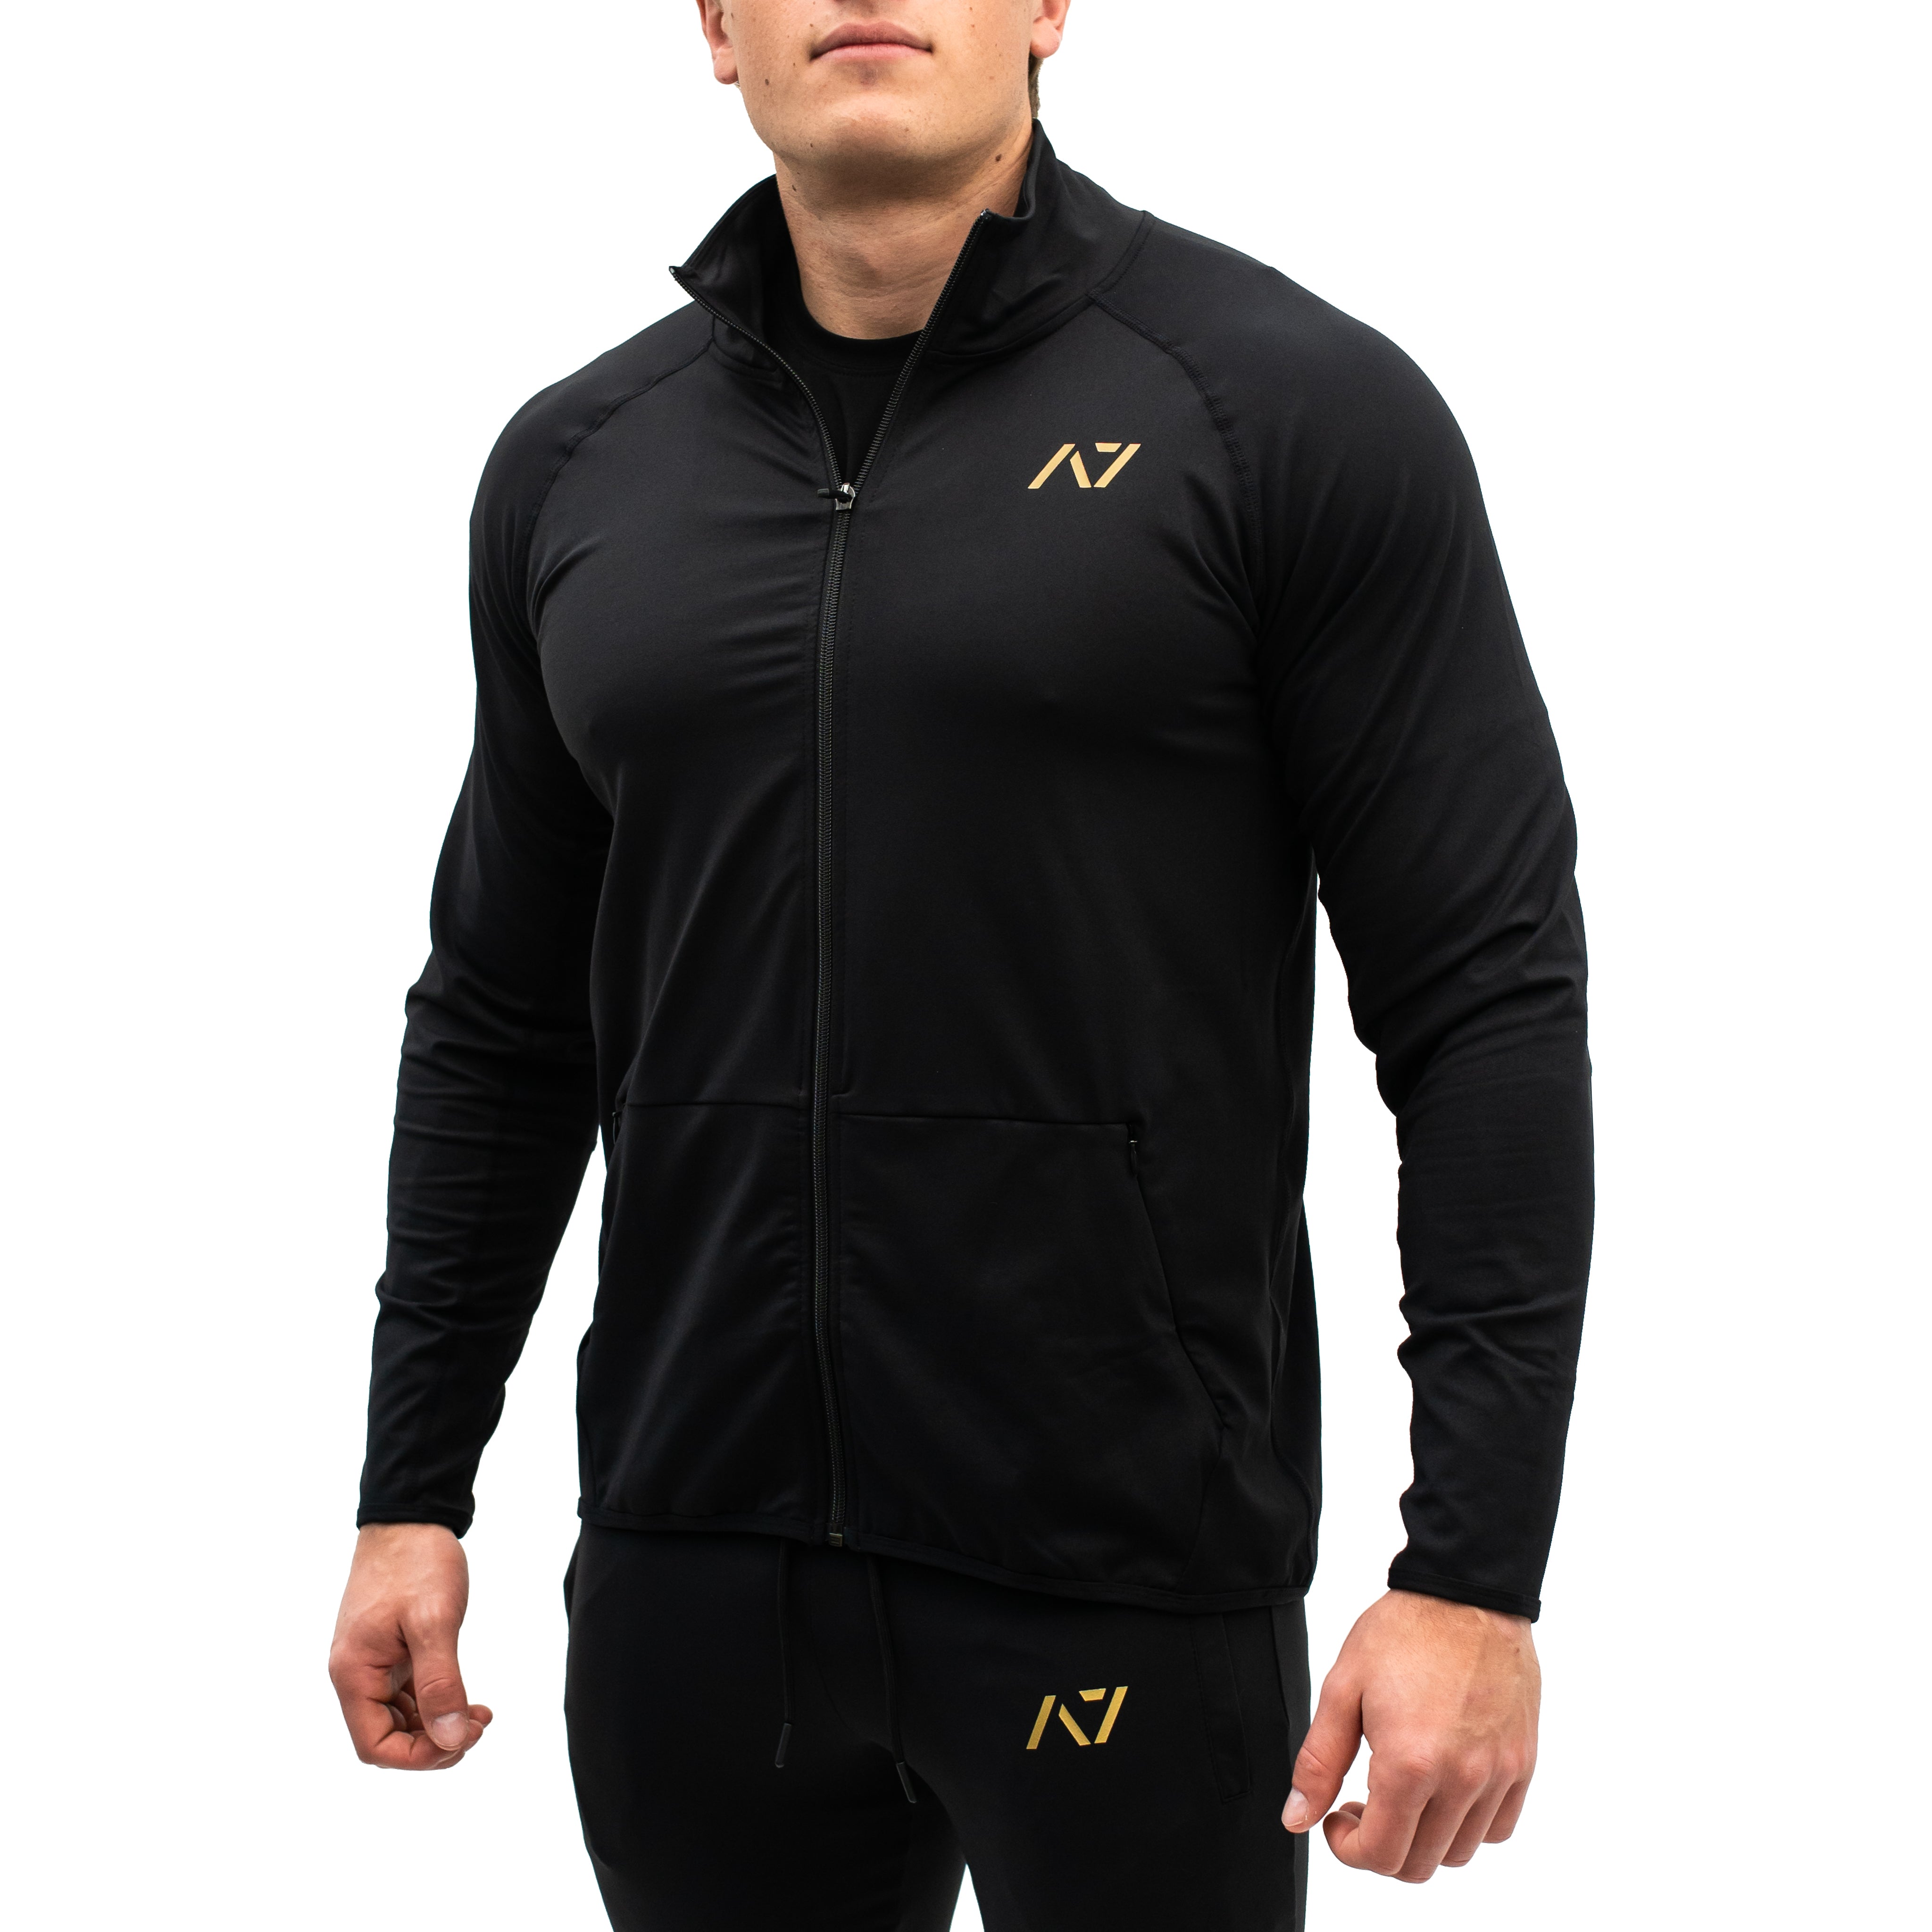 Whether going on a hike or heading to the gym our Defy Jacket will keep you cosy and comfortable. The jackets are made with premium moisture- 4-way-stretch material for a greater range of motion. These are a great fit for both men and women. Purchase Gold Standard Defy jacket from A7 UK shipping to UK or A7 Europe shipping to EU.